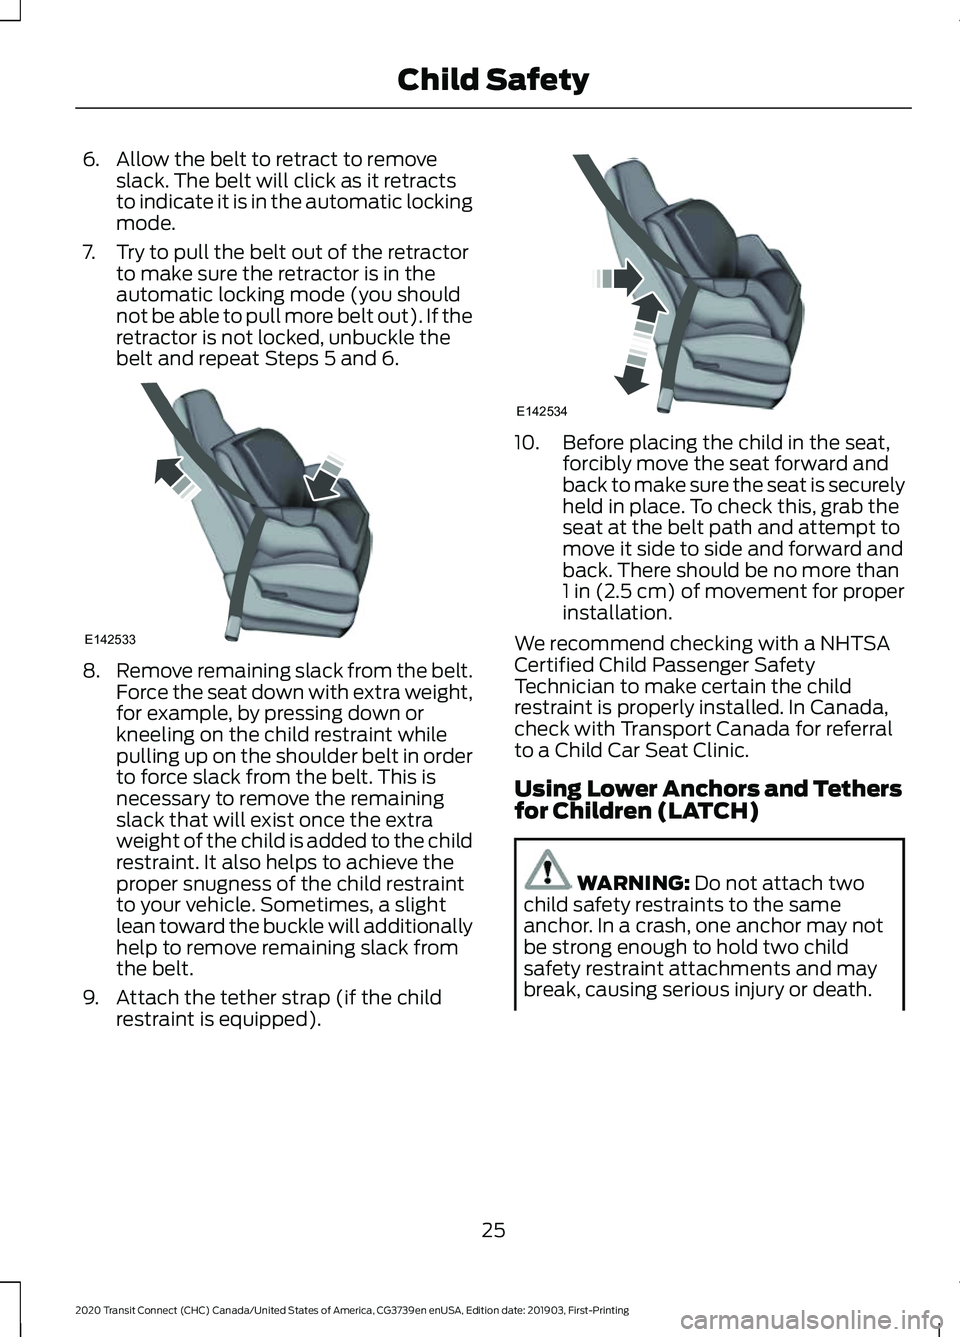 FORD TRANSIT CONNECT 2020  Owners Manual 6. Allow the belt to retract to remove
slack. The belt will click as it retracts
to indicate it is in the automatic locking
mode.
7. Try to pull the belt out of the retractor to make sure the retracto